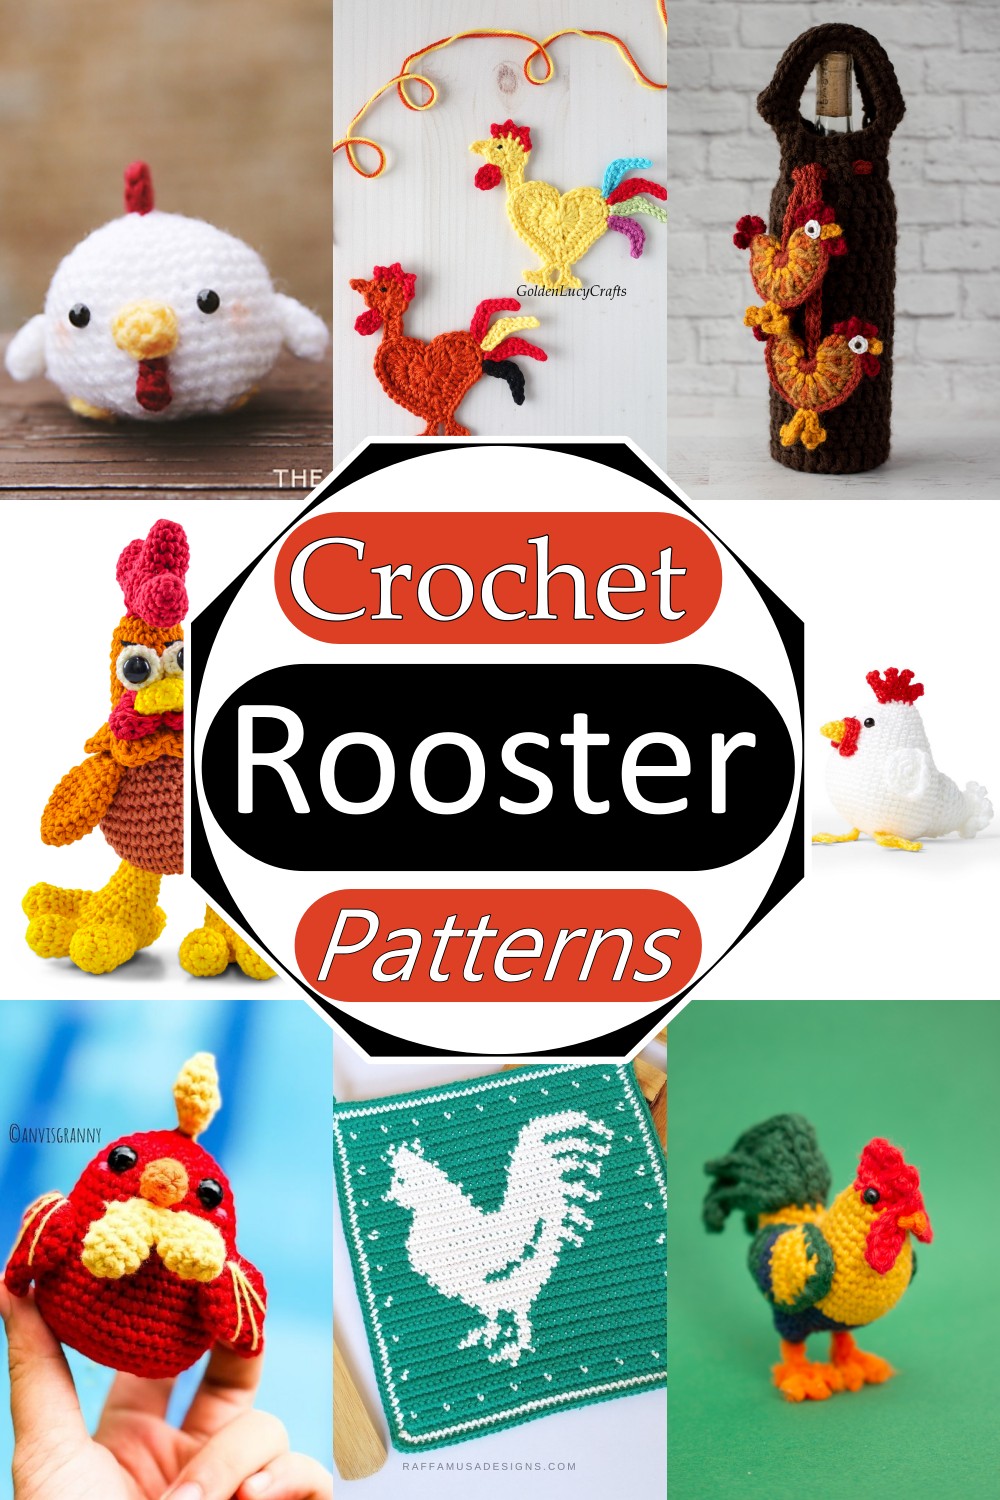 Crochet Rooster Patterns